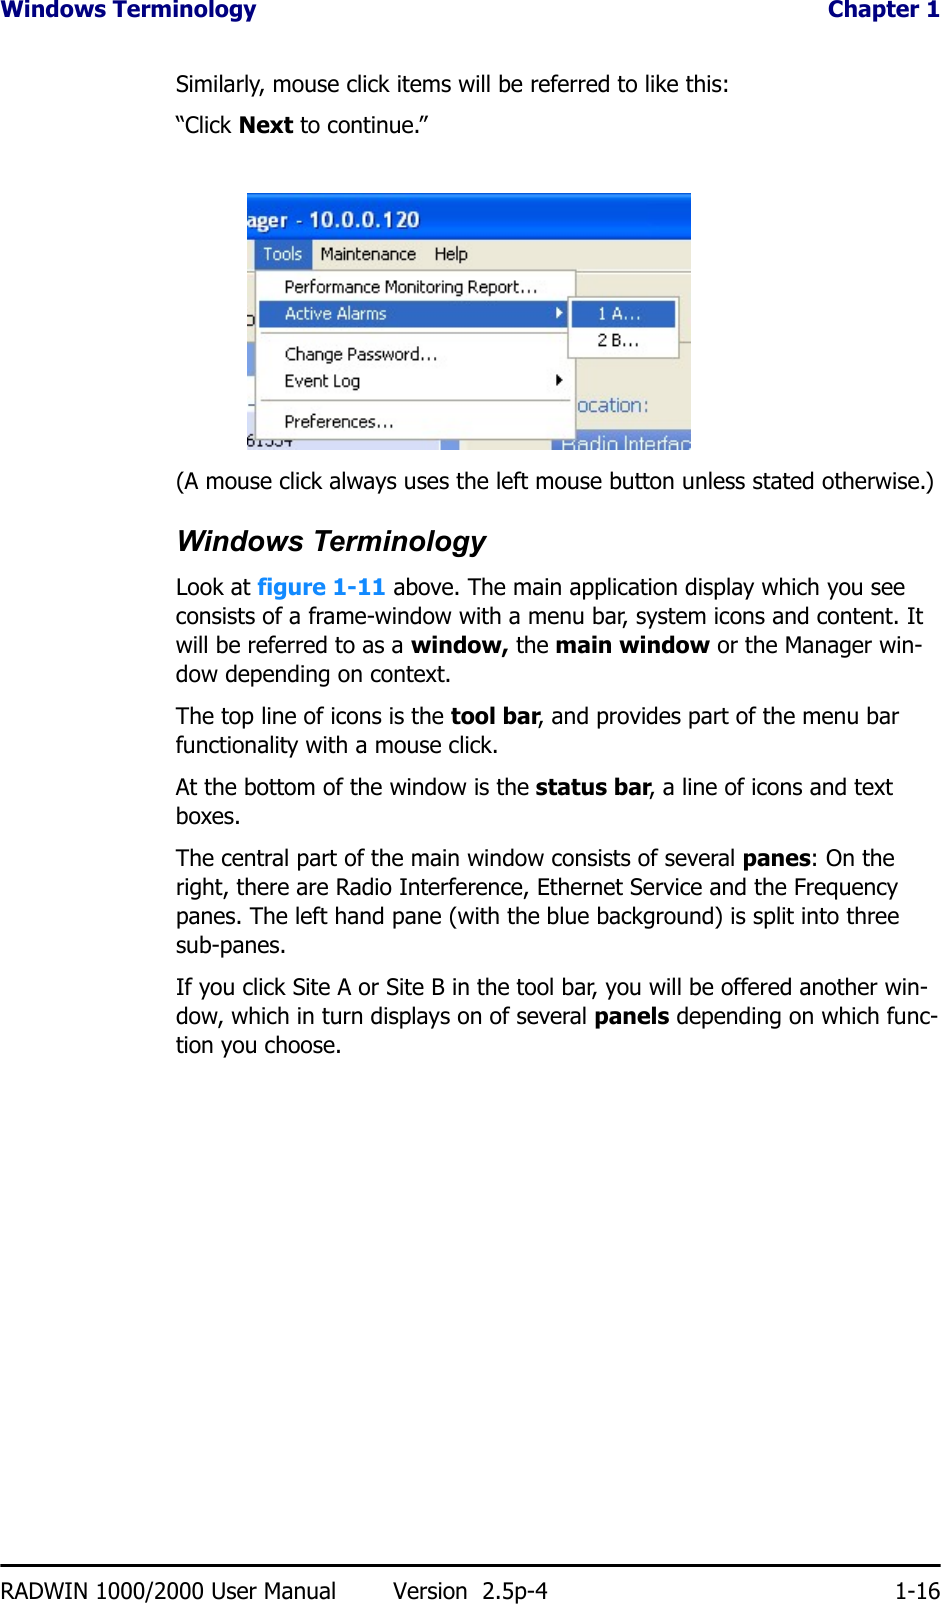 Windows Terminology  Chapter 1RADWIN 1000/2000 User Manual Version  2.5p-4 1-16Similarly, mouse click items will be referred to like this:“Click Next to continue.”(A mouse click always uses the left mouse button unless stated otherwise.)Windows TerminologyLook at figure 1-11 above. The main application display which you see consists of a frame-window with a menu bar, system icons and content. It will be referred to as a window, the main window or the Manager win-dow depending on context.The top line of icons is the tool bar, and provides part of the menu bar functionality with a mouse click.At the bottom of the window is the status bar, a line of icons and text boxes.The central part of the main window consists of several panes: On the right, there are Radio Interference, Ethernet Service and the Frequency panes. The left hand pane (with the blue background) is split into three sub-panes.If you click Site A or Site B in the tool bar, you will be offered another win-dow, which in turn displays on of several panels depending on which func-tion you choose.